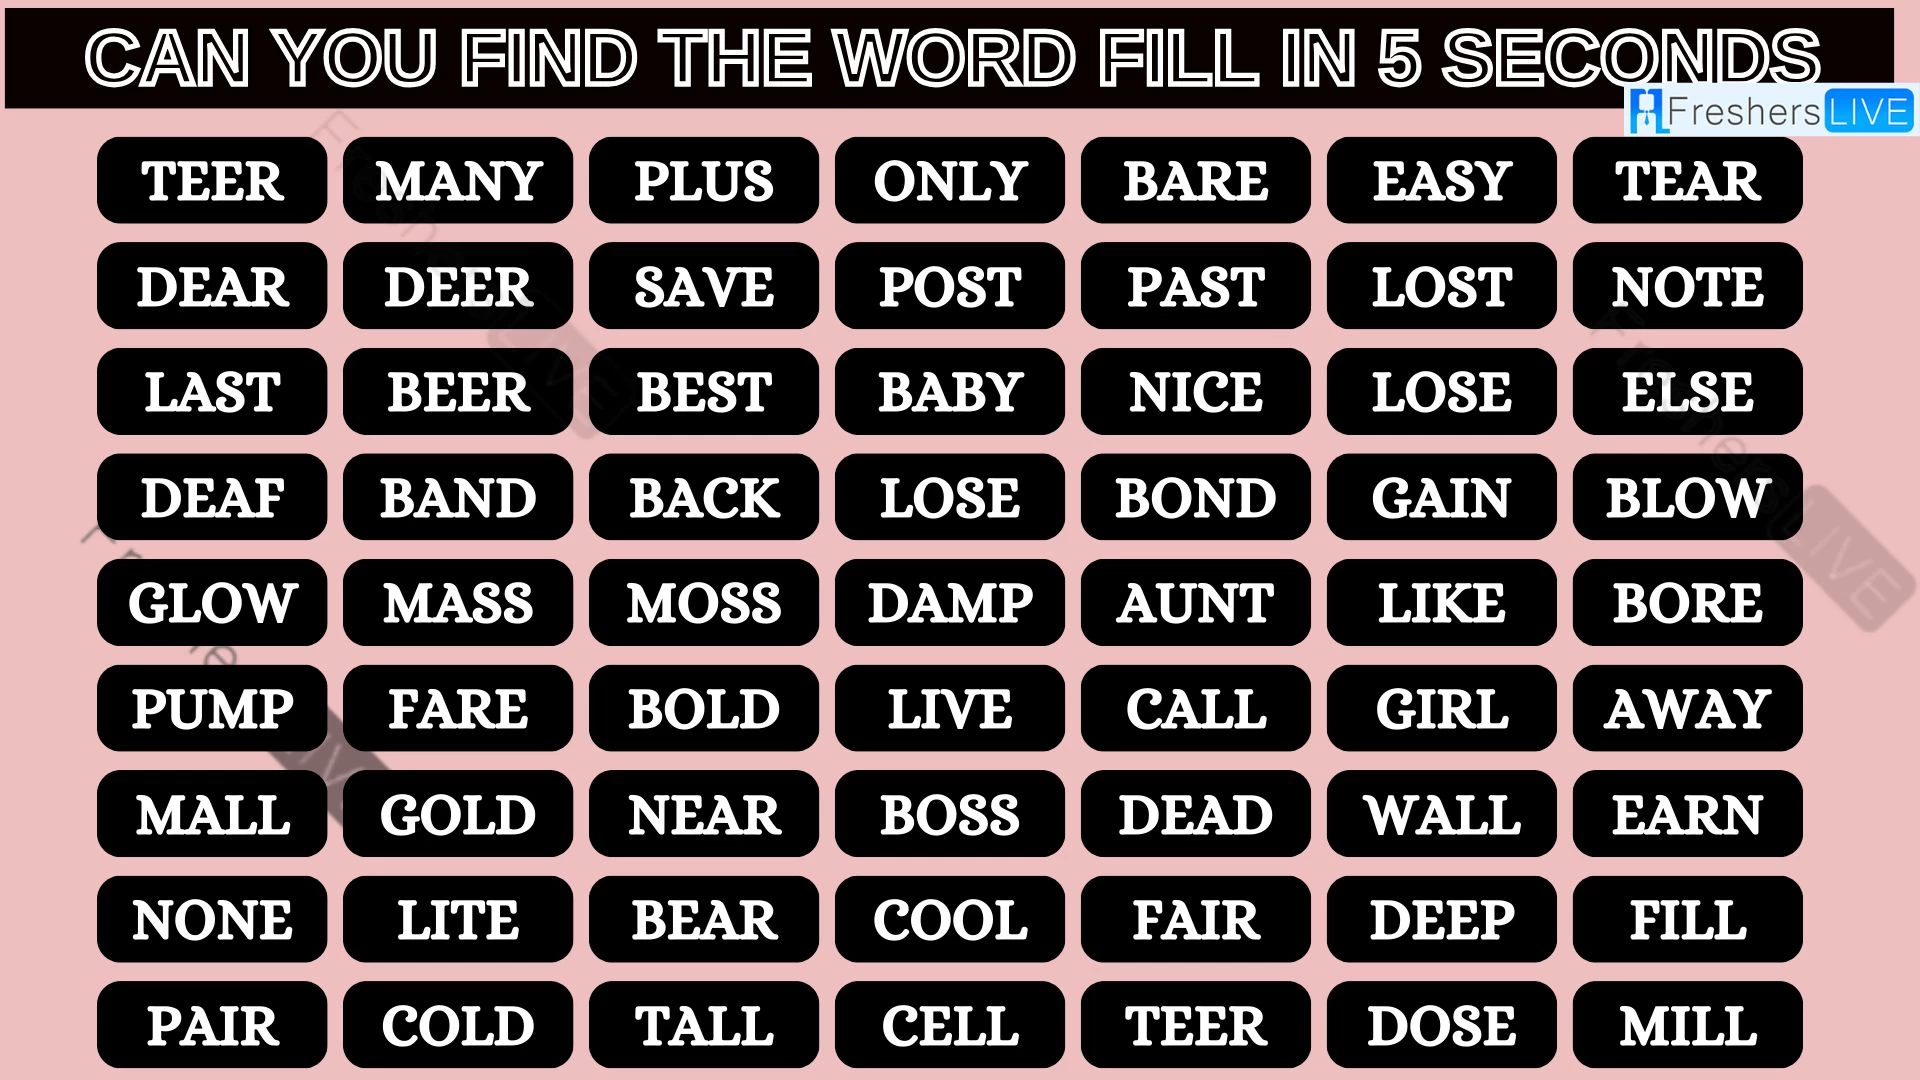 Only 20/20 HD Vision People can Find the Word Fill in 5 Secs